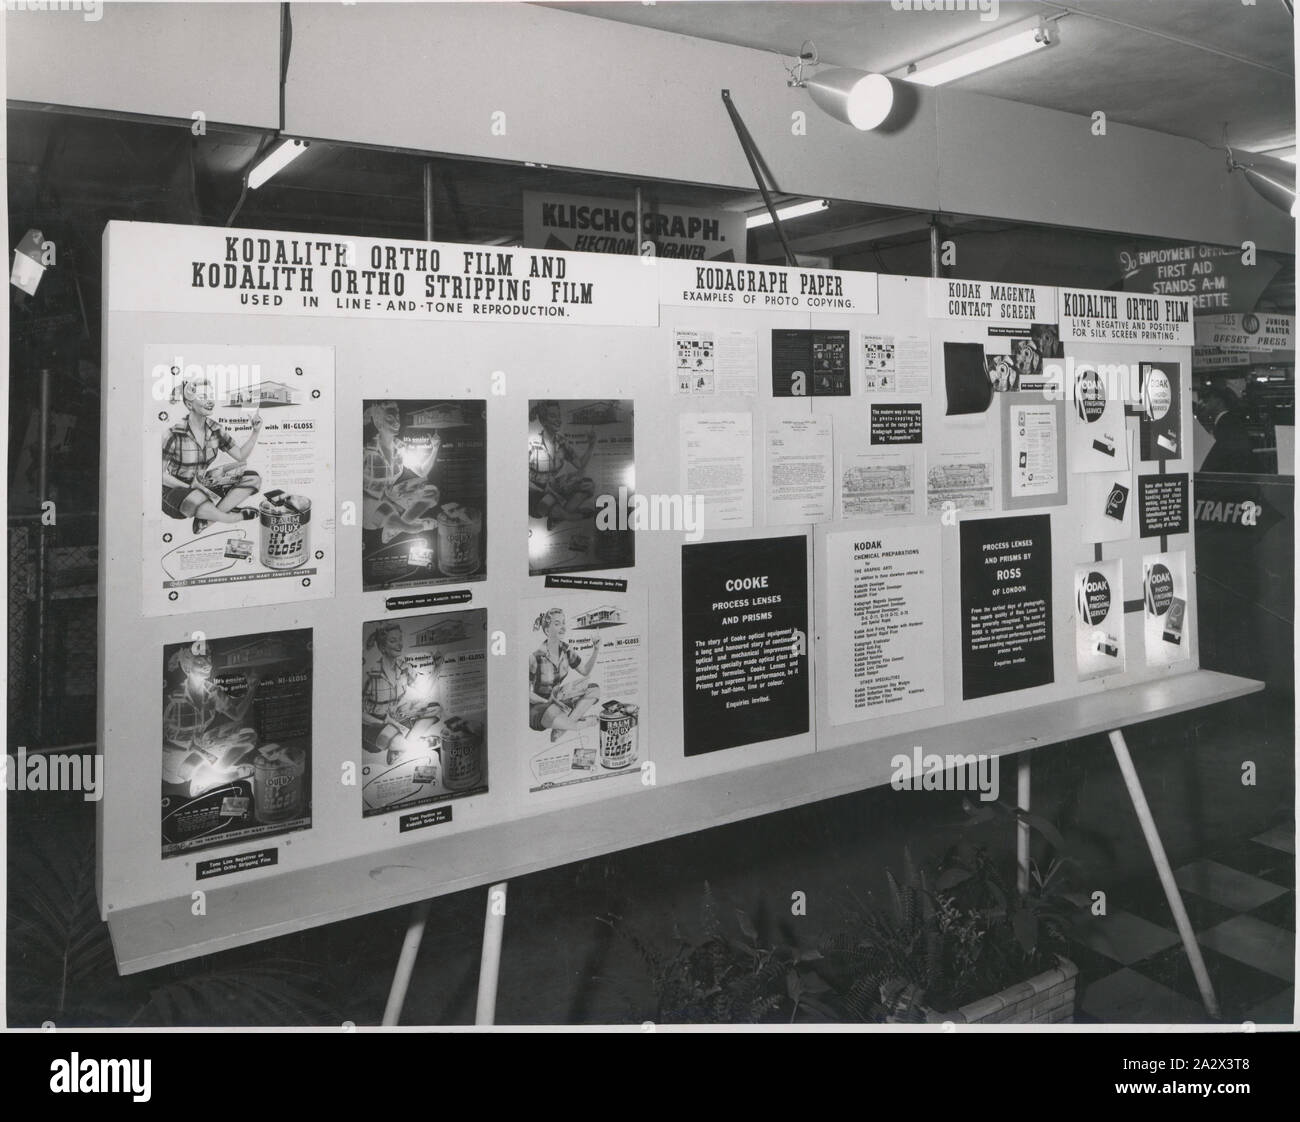 Photograph, Display Panel, Graphic Arts Products, Sydney, circa 1940s, Black and white photograph of a Kodak Australasia Pty Ltd exhibition display panel themed around graphic arts products, circa 1940s. Products include Kodalith Ortho films, Kodagraph Paper and Kodak Magenta Contact Screen. Beneath the panel, which is covered in posters and lit from above, is a chequerboard floor and decorative planter boxes with indoor plants. Other exhibition stands Stock Photo